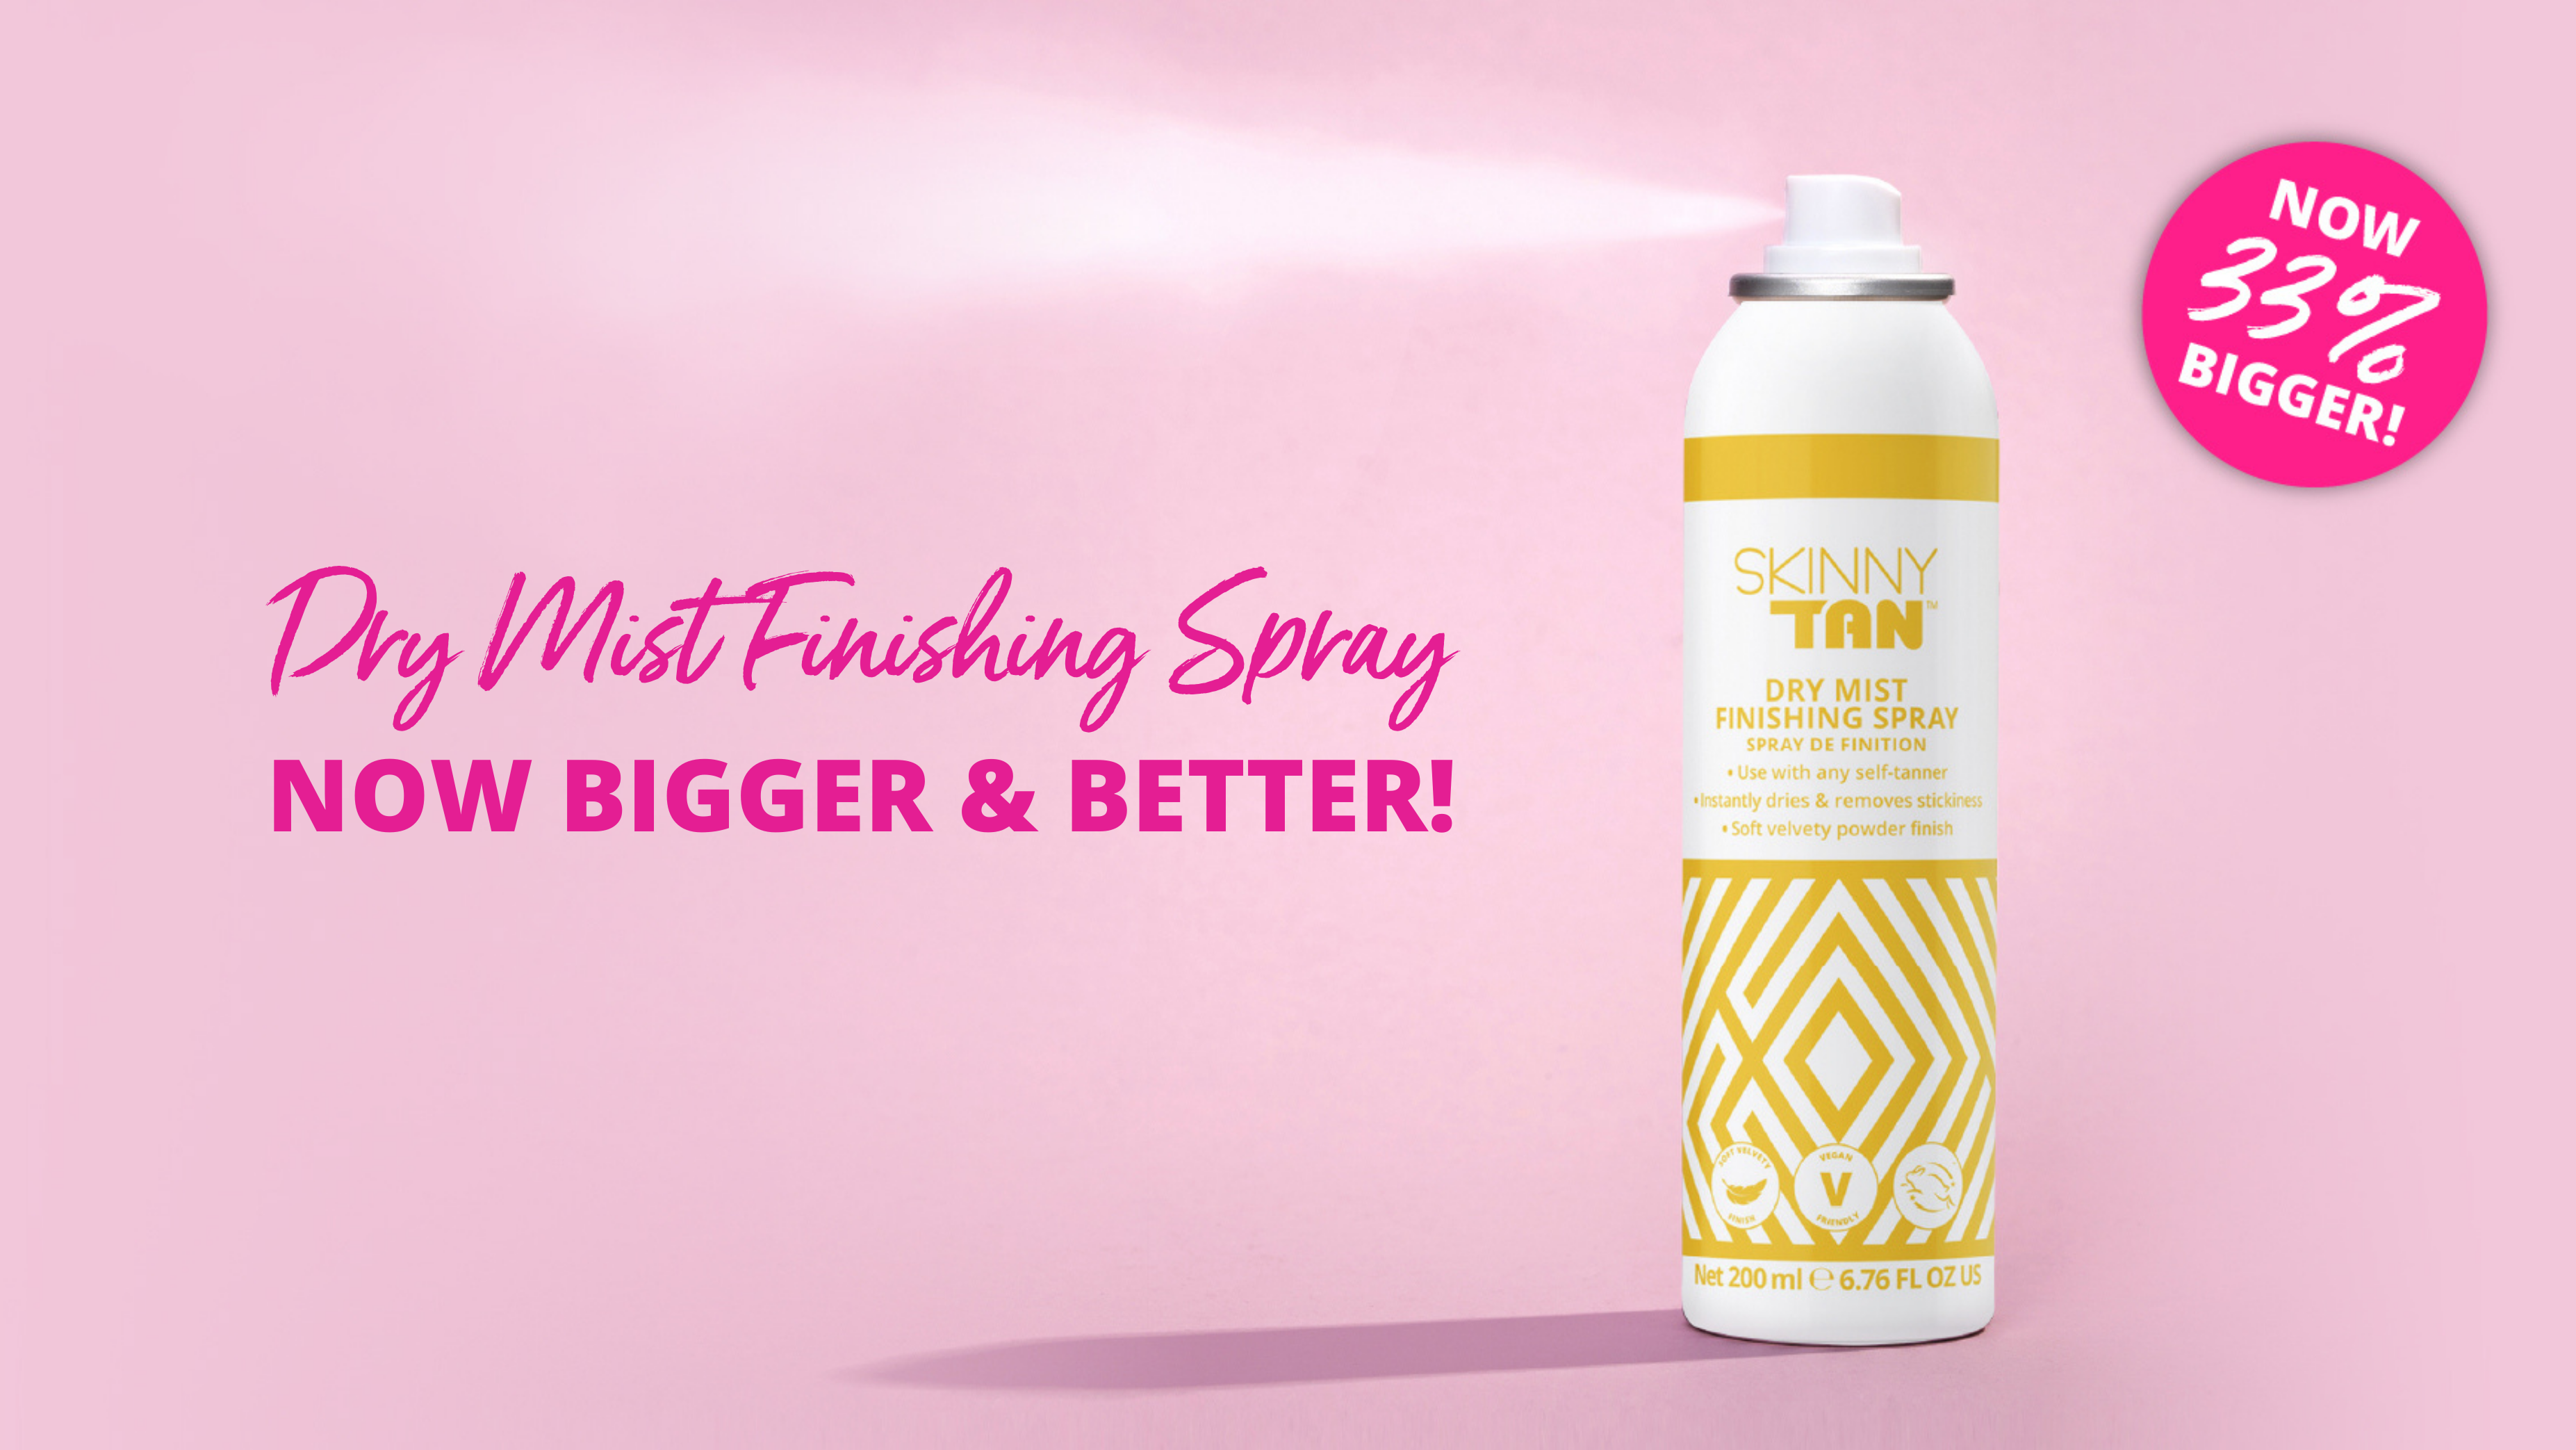 Perfectly Set Your Tan in SECONDS! Get set and GO GIRL!